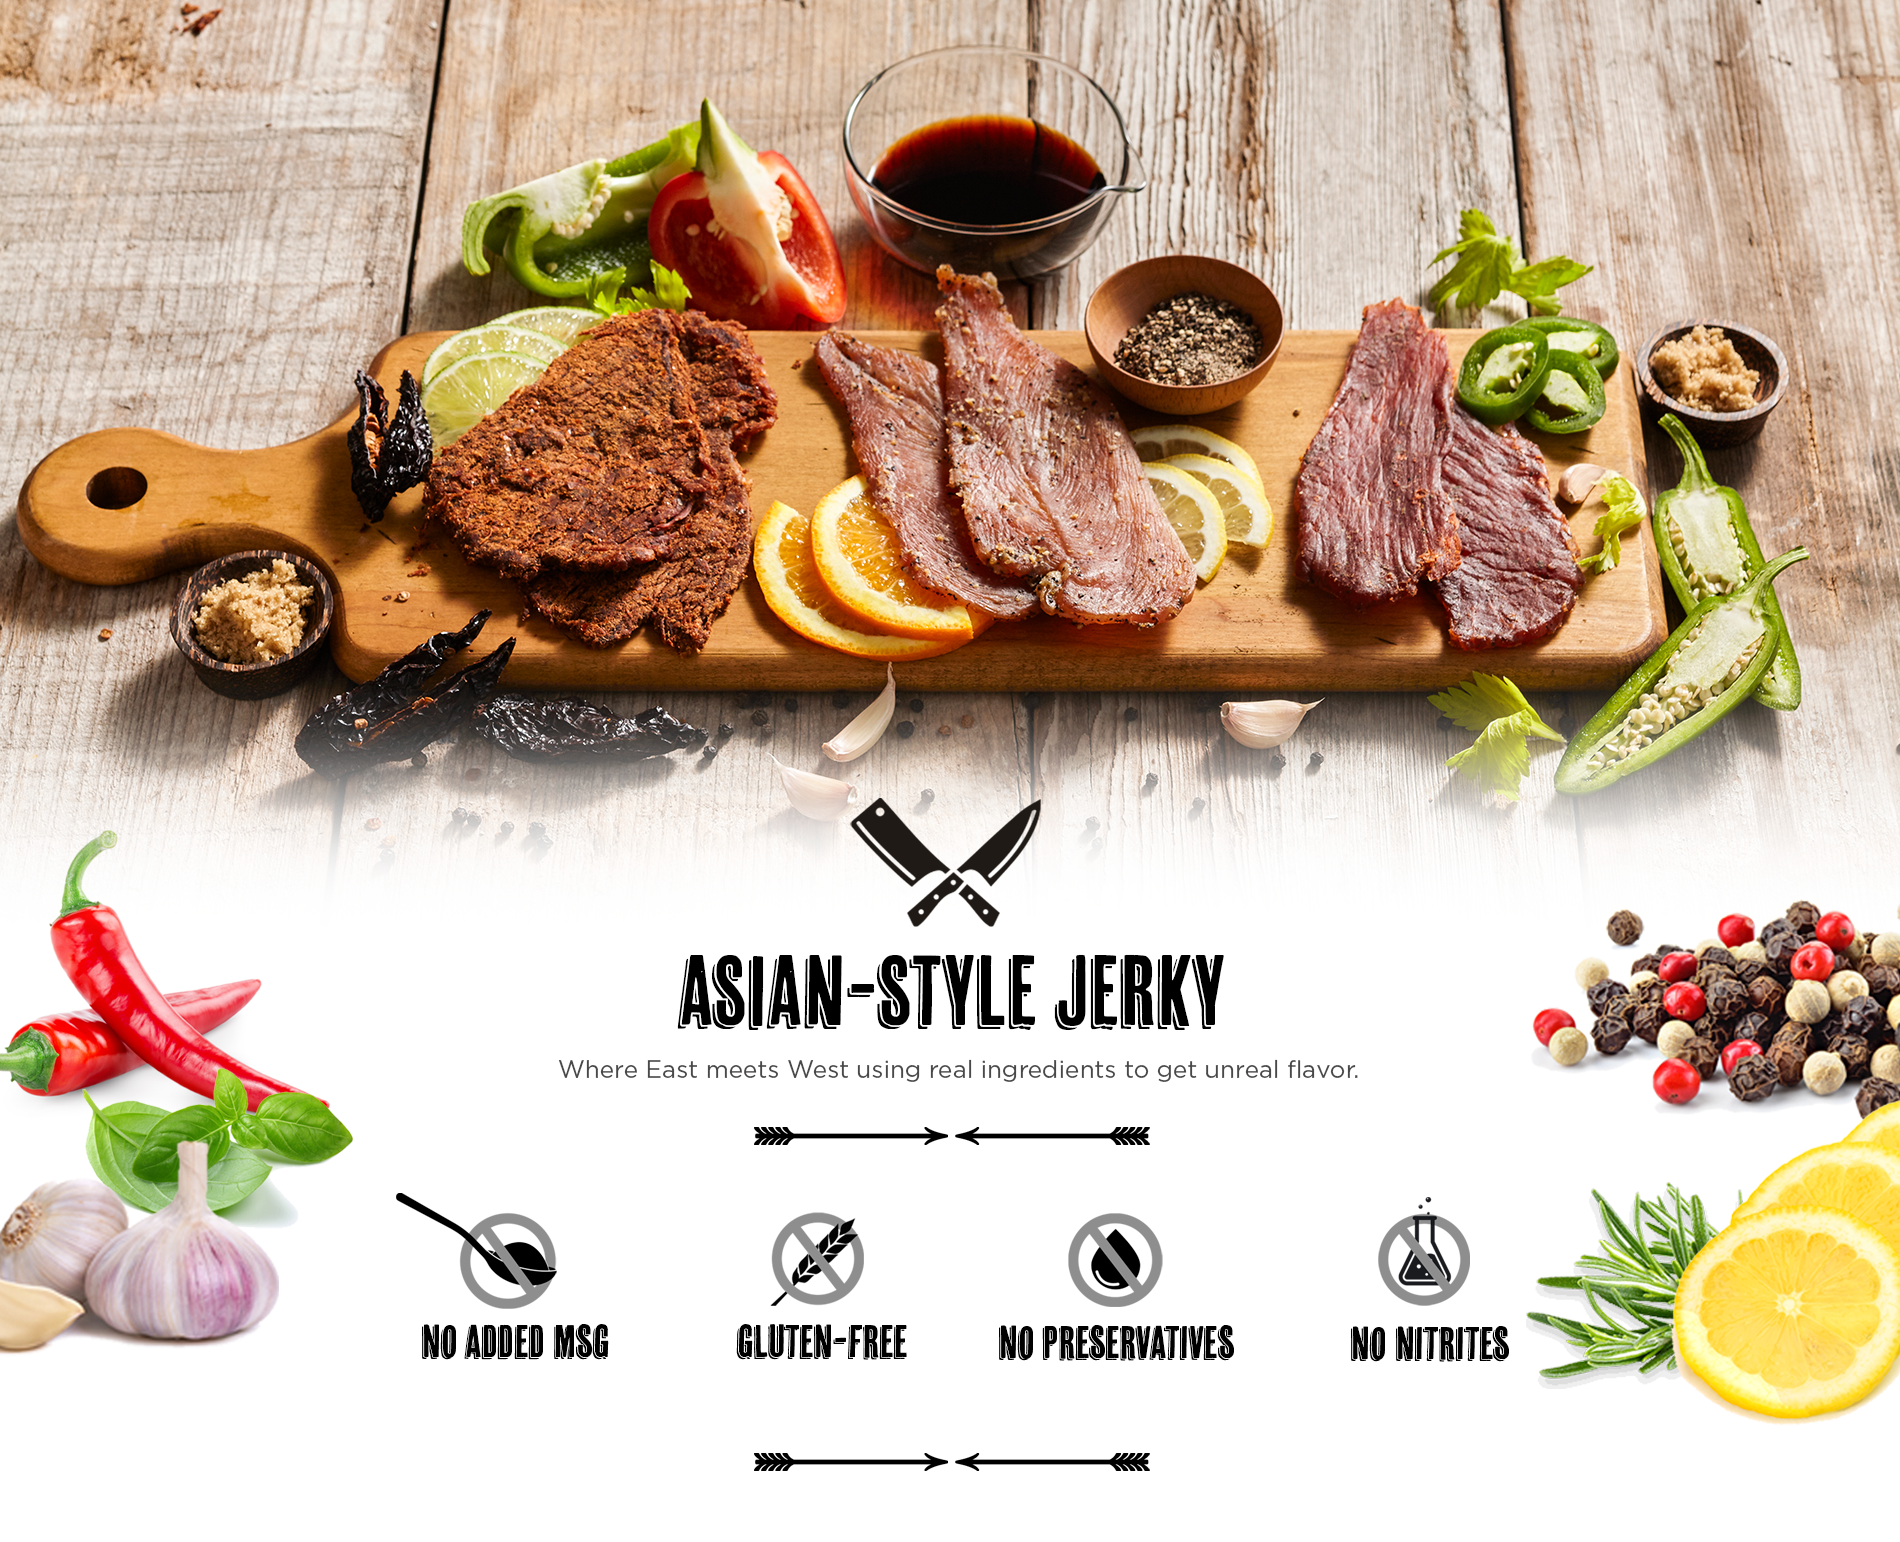 ASIAN-STYLE JERKY. No added MSG. Gluten-free. No preservatives. No nitrites. Where East meets the West using real ingredients to get unreal flavor.